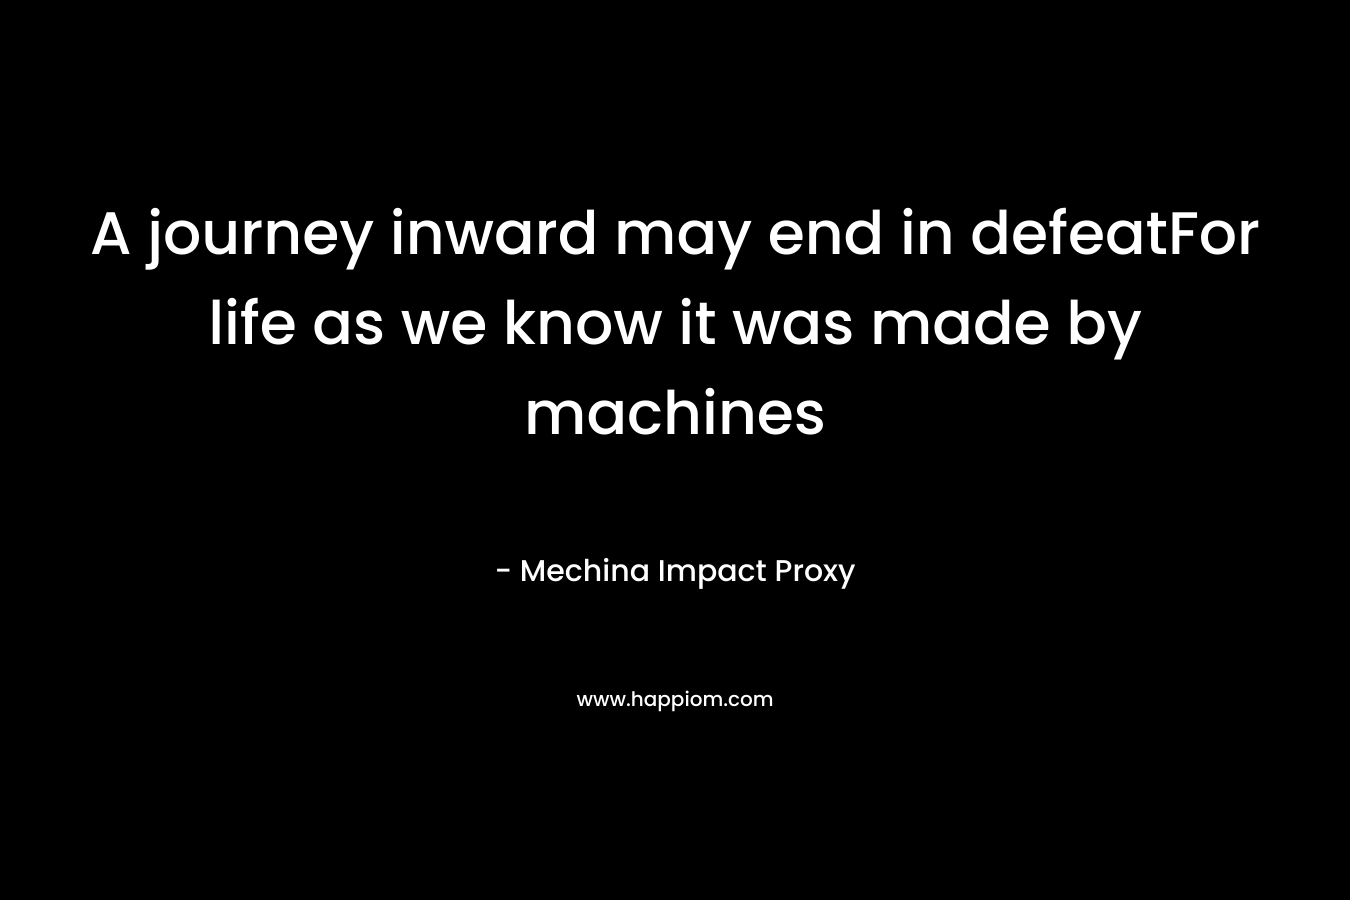 A journey inward may end in defeatFor life as we know it was made by machines